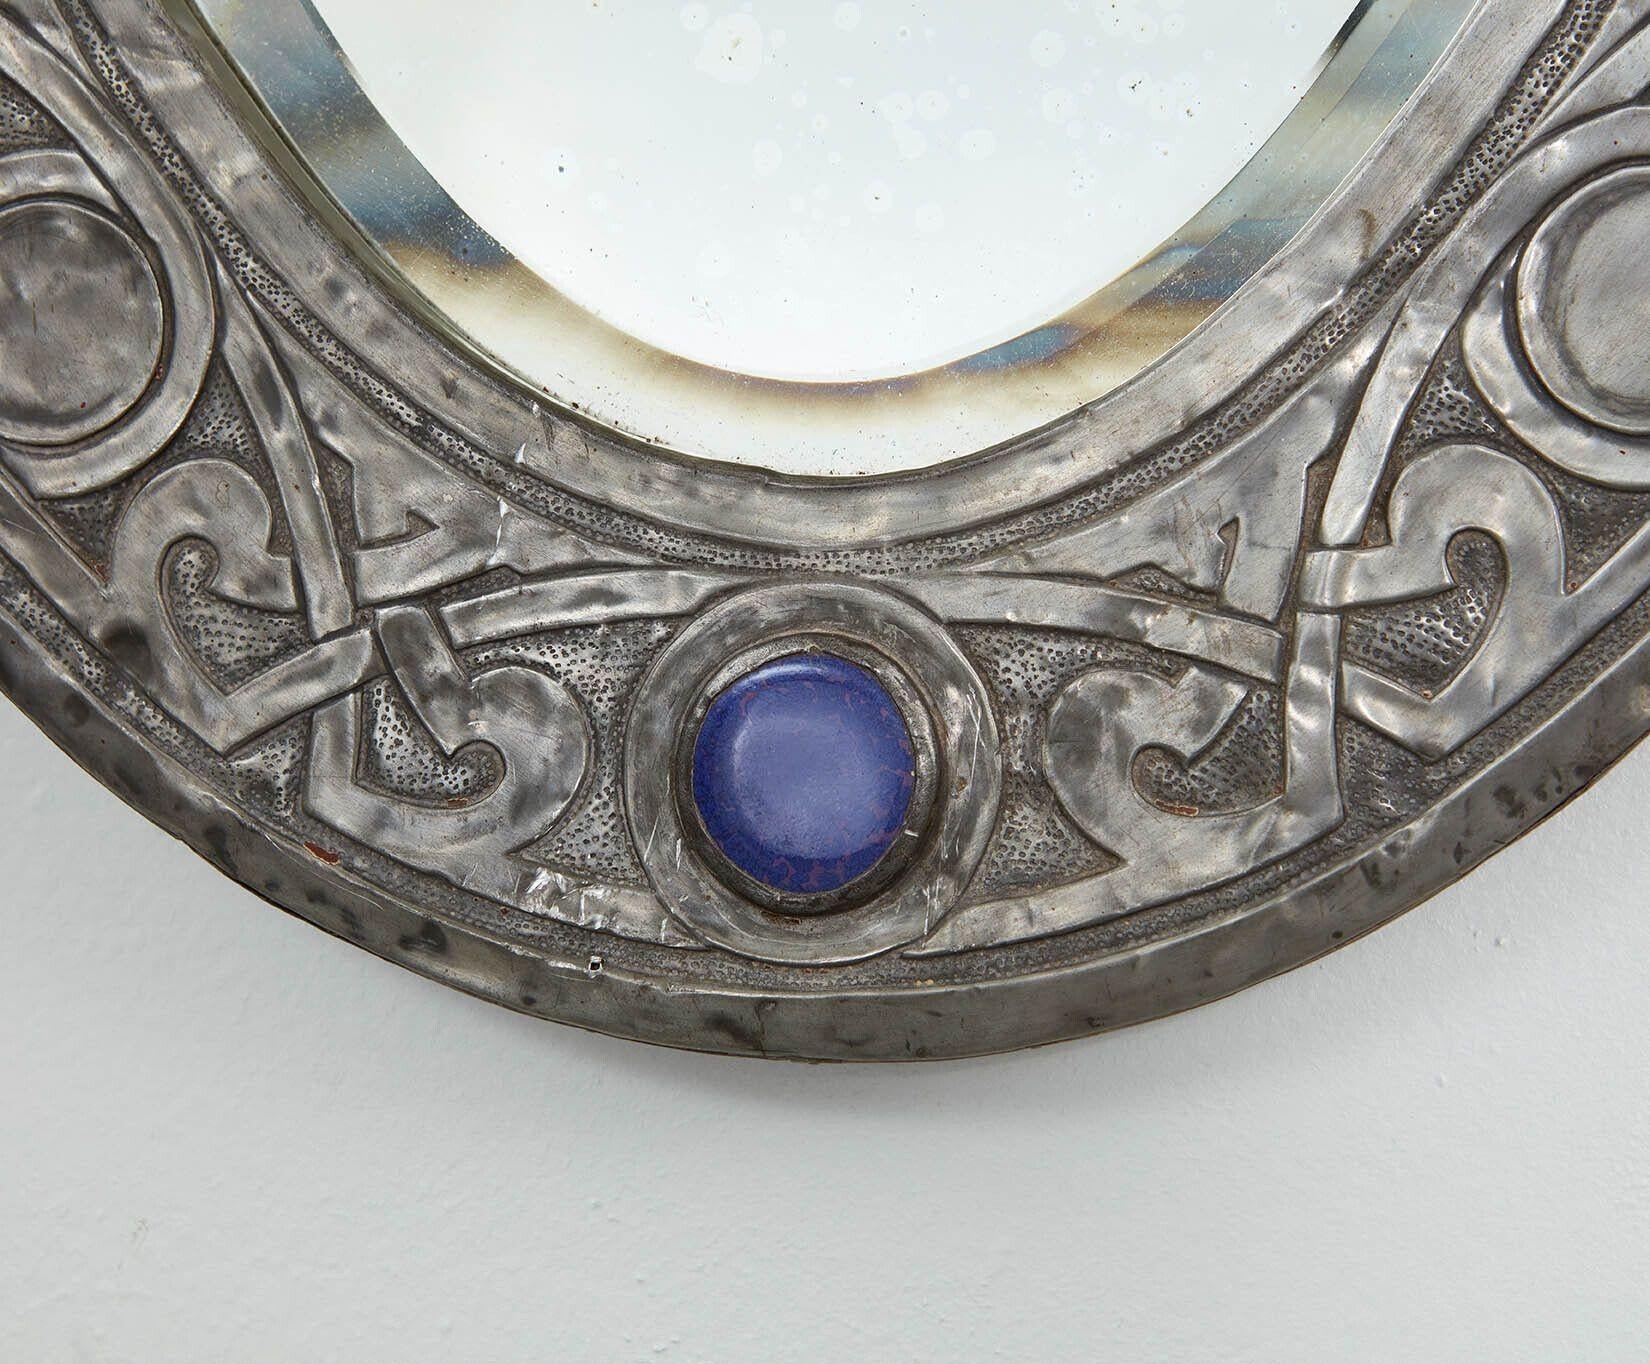 An Arts & Crafts oval mirror in hammered pewter with Celtic strapwork embossing on a punched ground, and having round blue enamel cabochons on the top and bottom, retaining original beveled mirror plate and original backboard.